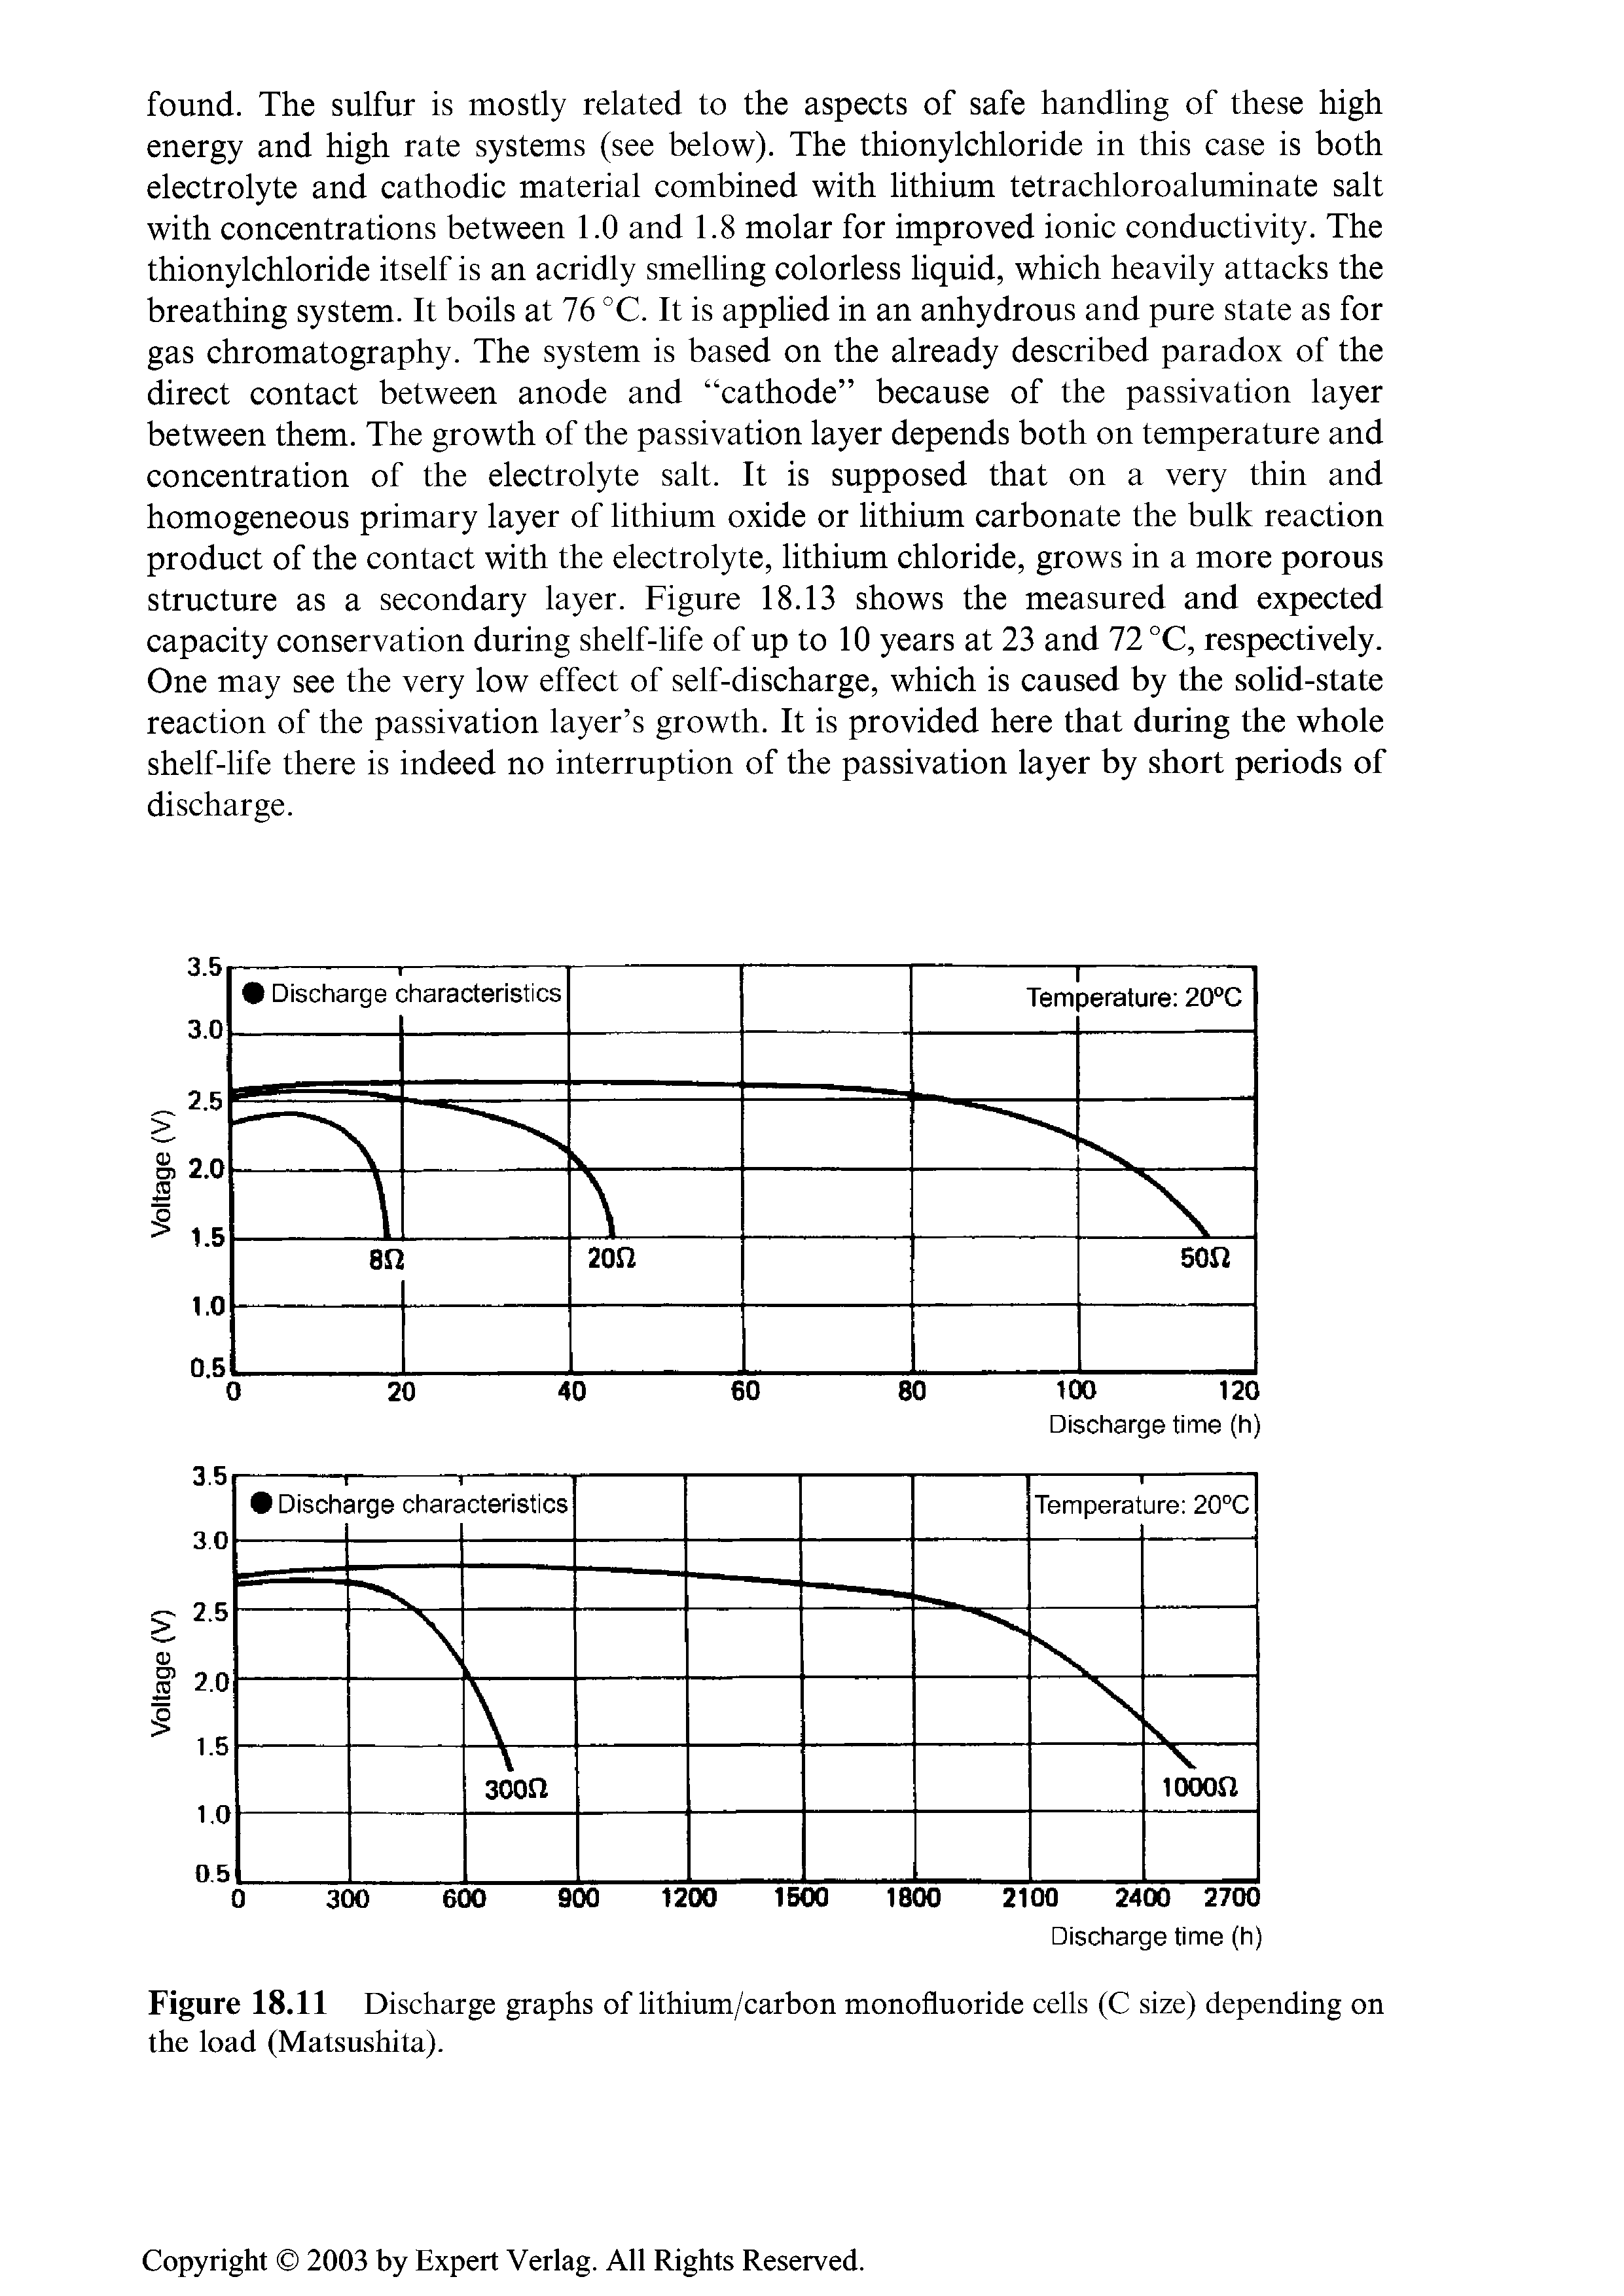 Figure 18.11 Discharge graphs of lithium/carbon monofluoride cells (C size) depending on the load (Matsushita).